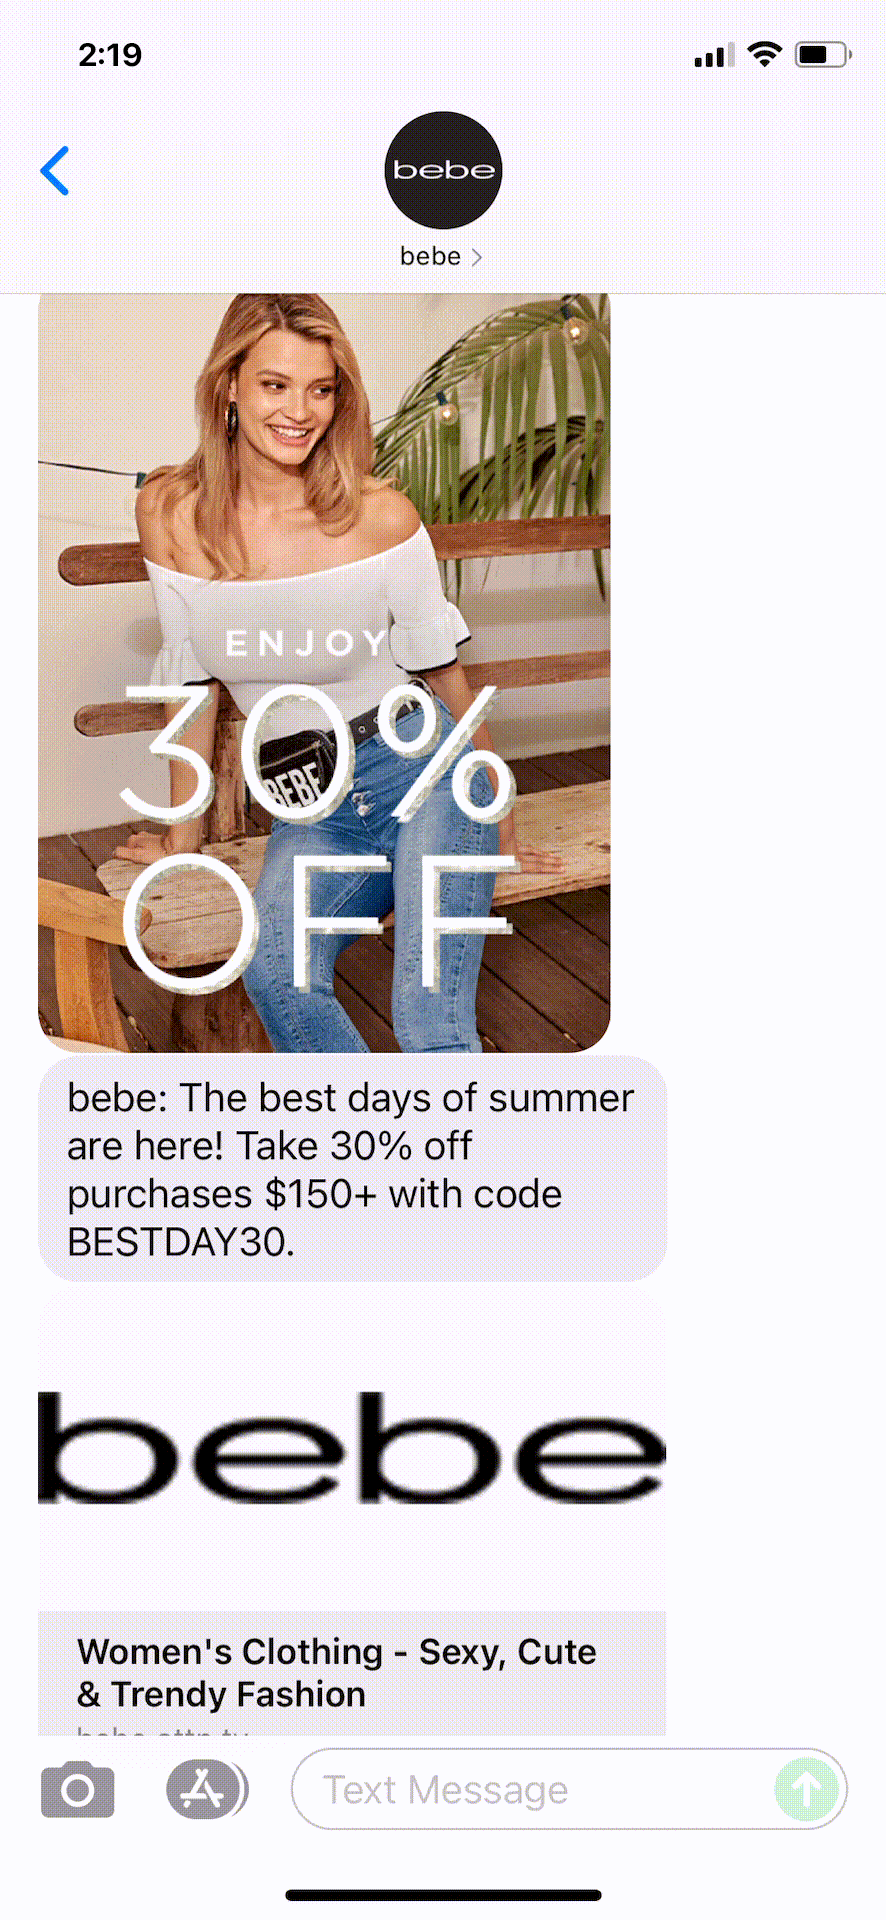 bebe-Text-Message-Marketing-Example-08.17.2021